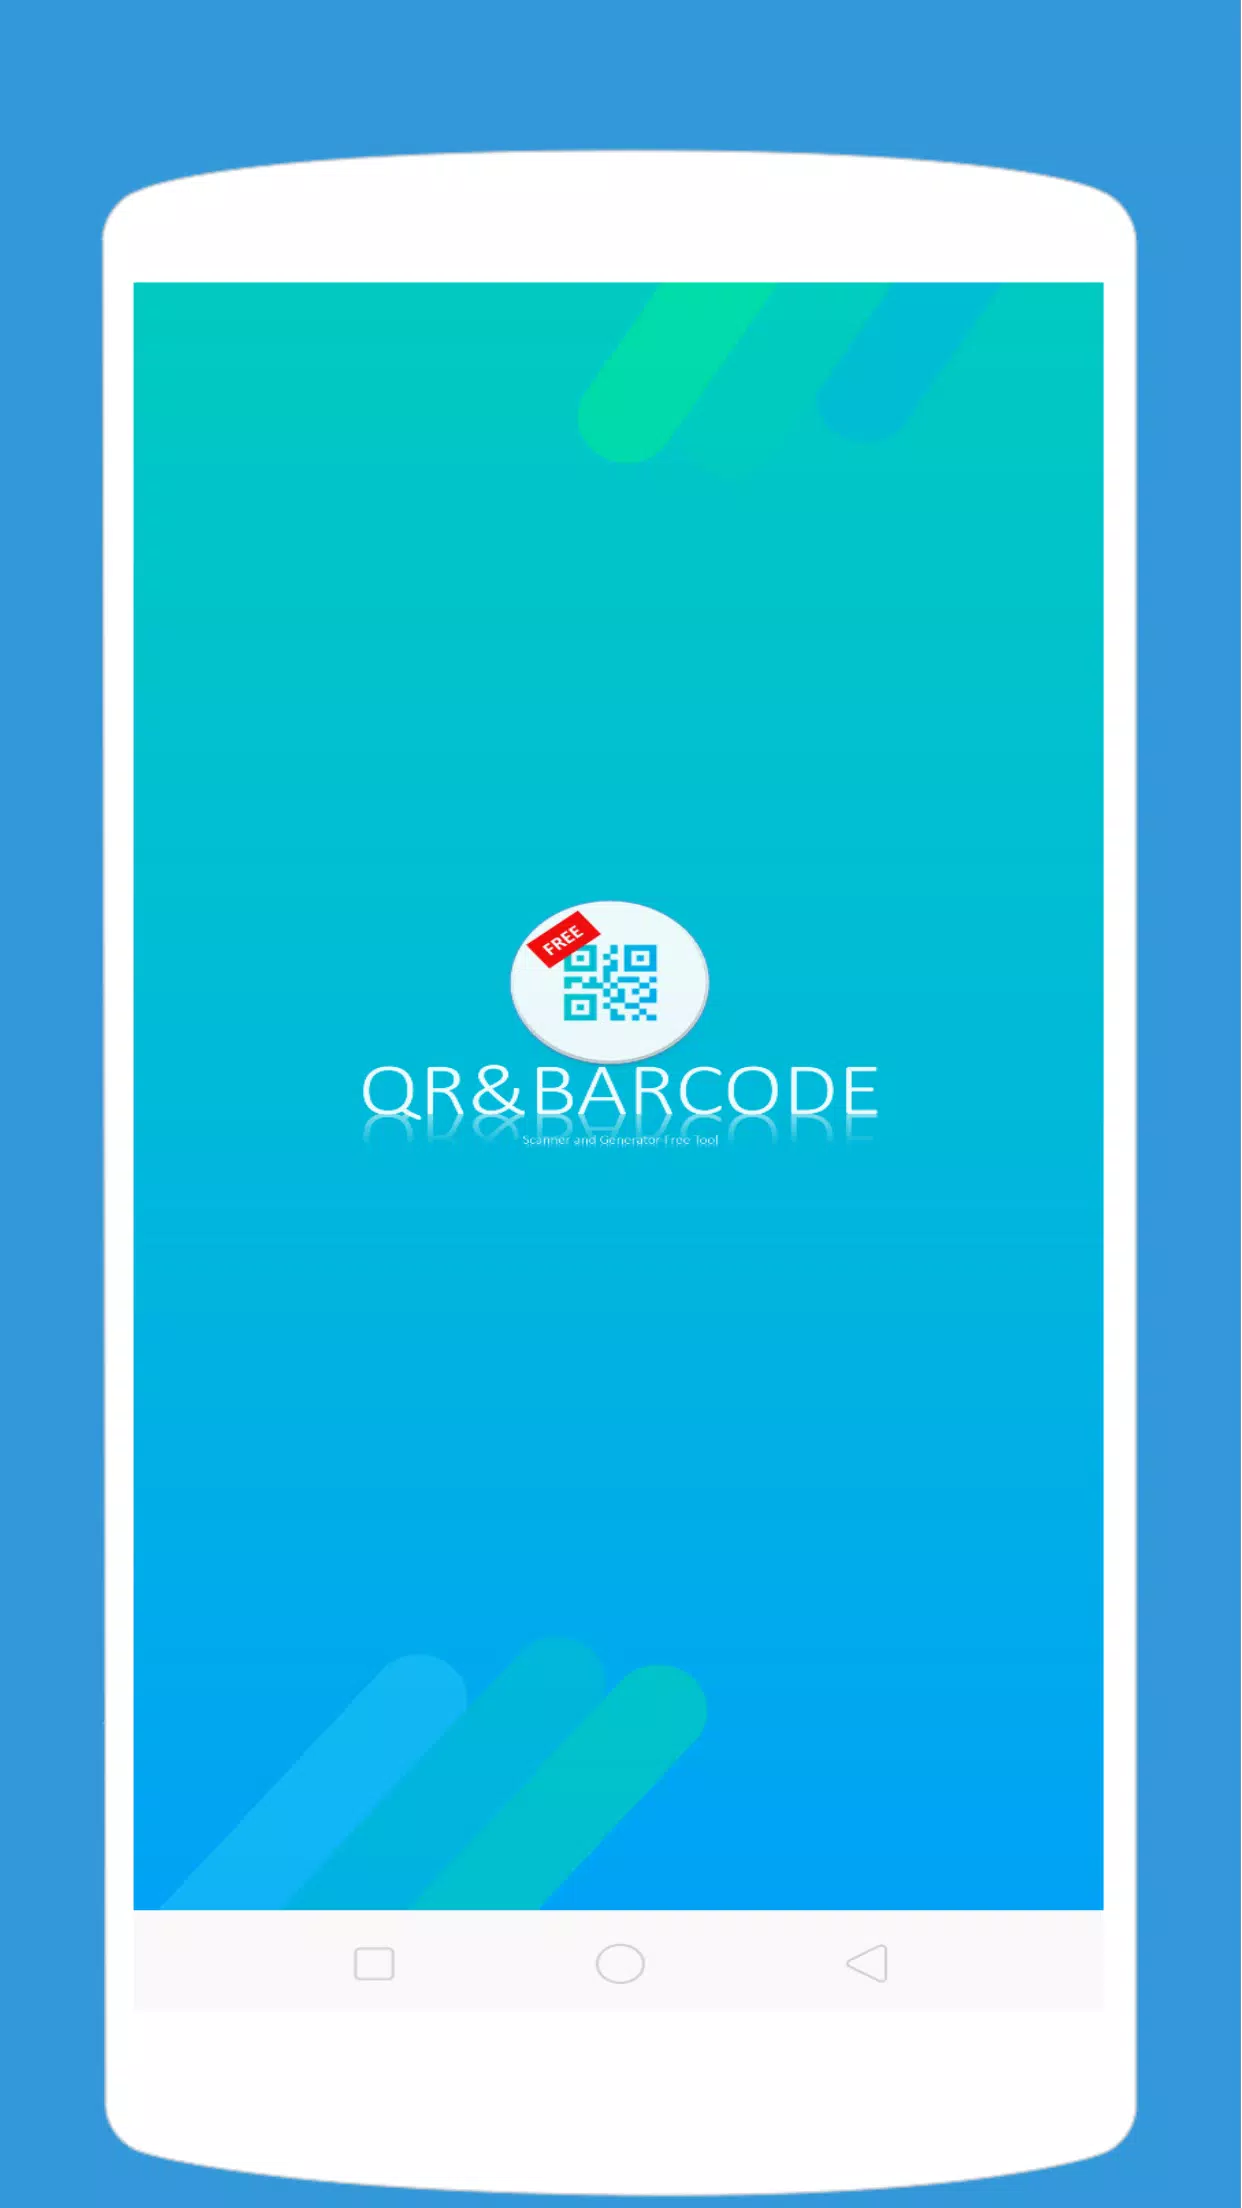 Free QR & Barcode Scanner for Android - APK Download